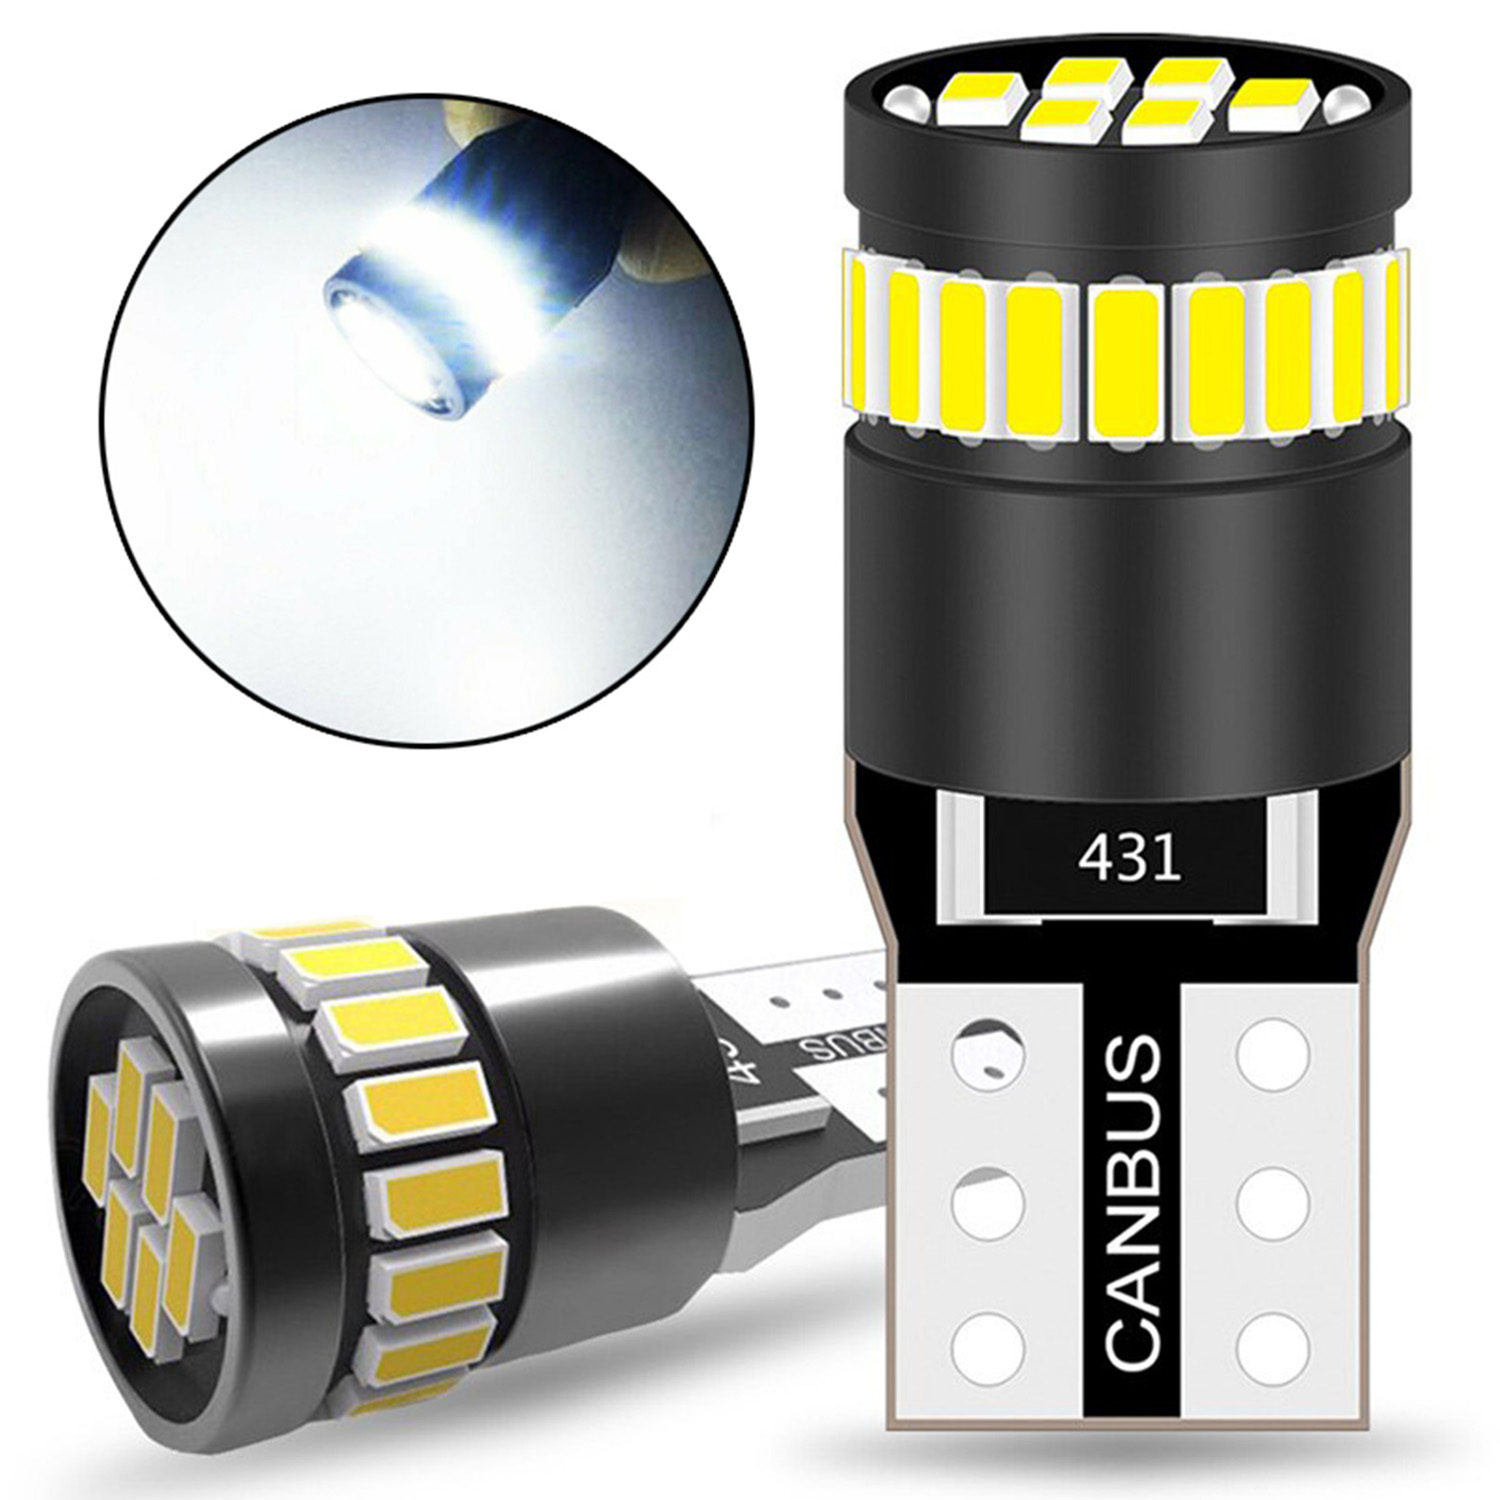 Bombilla LED para coche W5W T10 57 SMD 3014 CAN BUS